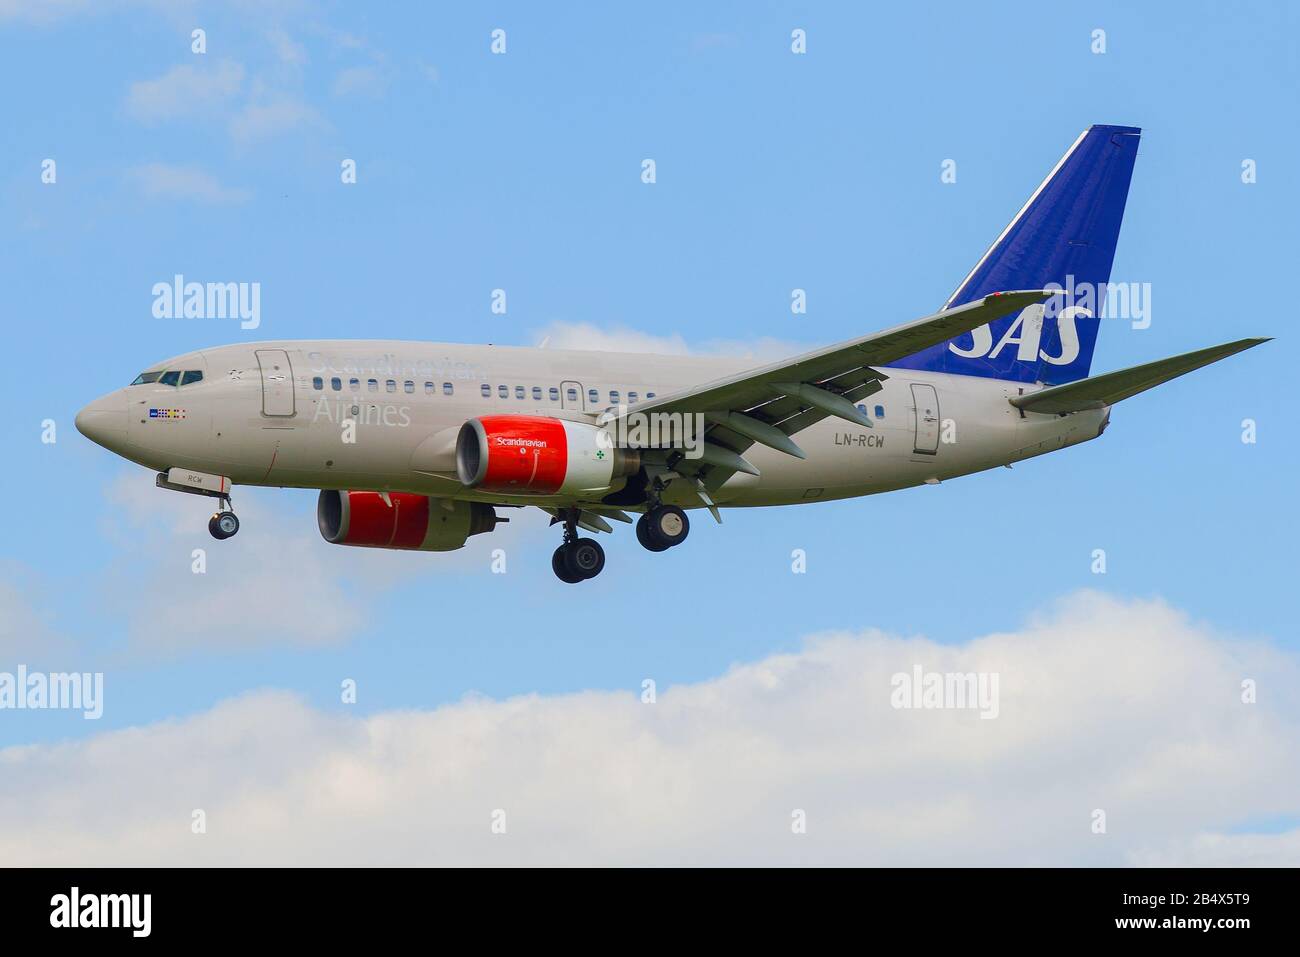 ST. PETERSBURG, RUSSIA - MAY 17, 2016: Scandinavian Air System airline Boeing 737-683 (LN-RCW) on the glide path Stock Photo